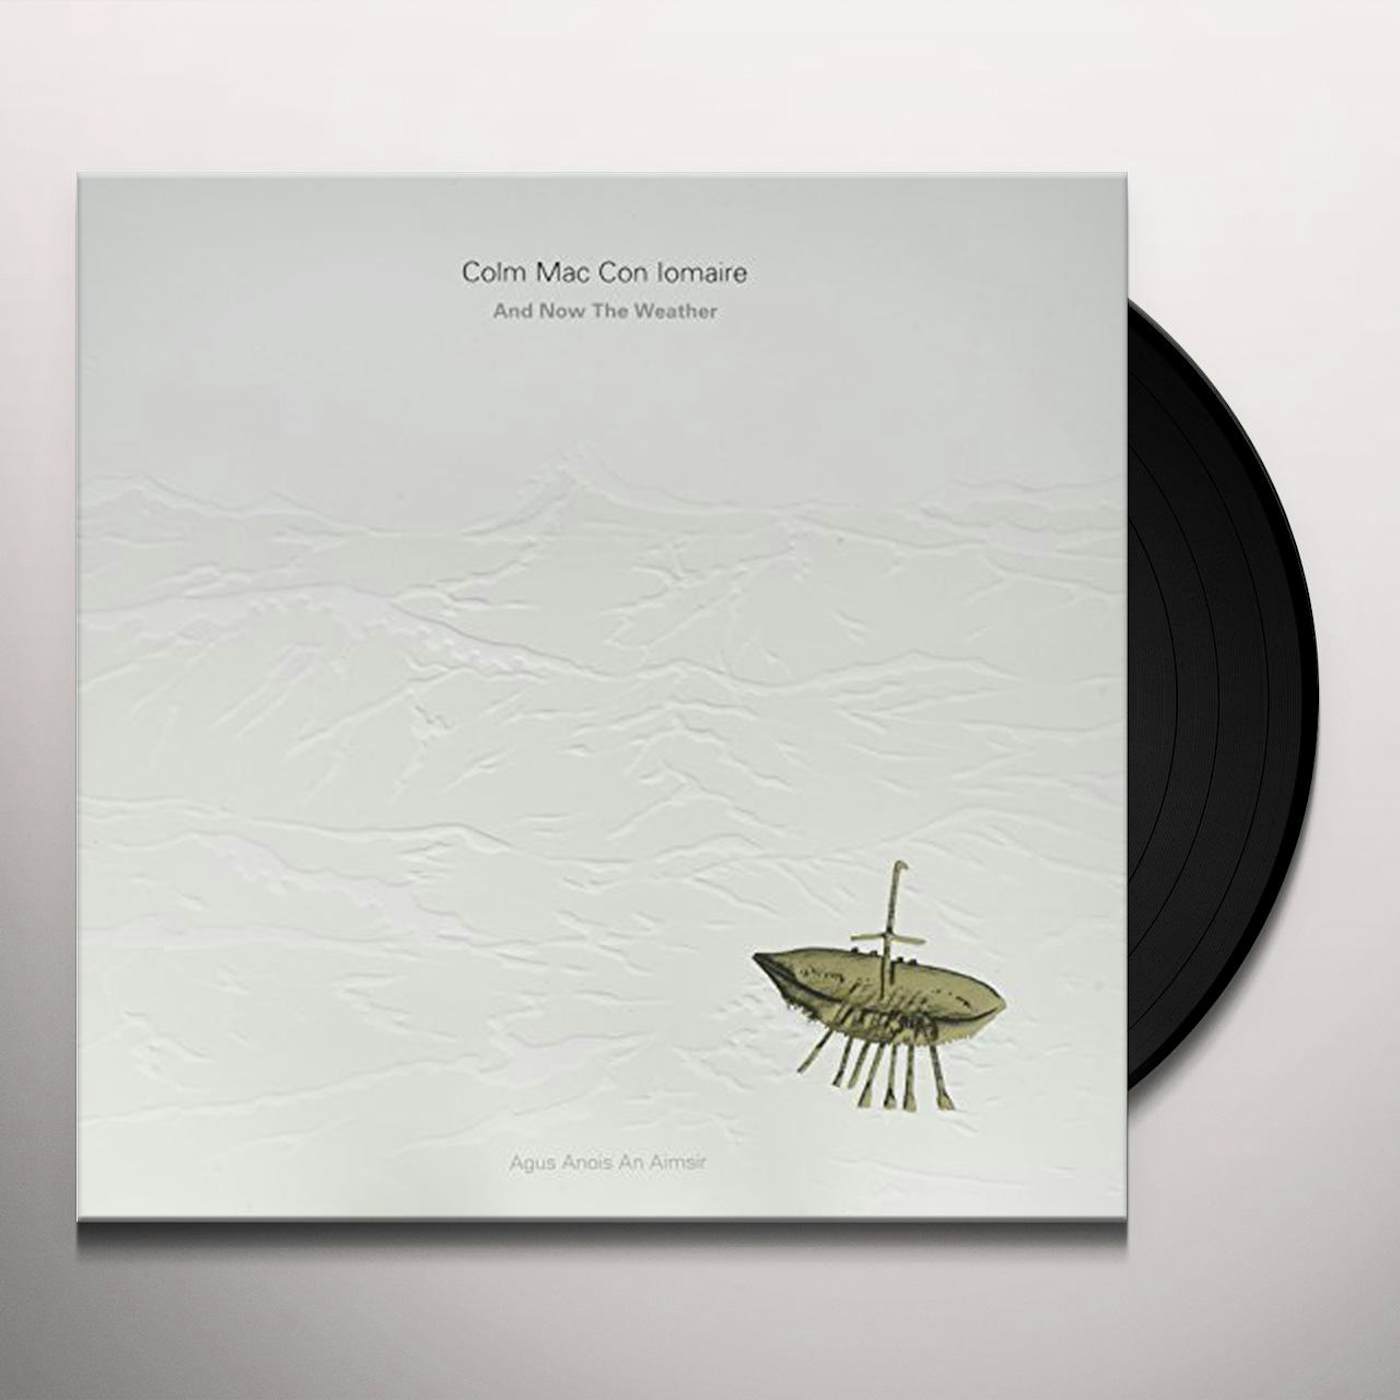 Colm Mac Con Iomaire And Now The Weather (Agus Anois An Aimsir) Vinyl Record